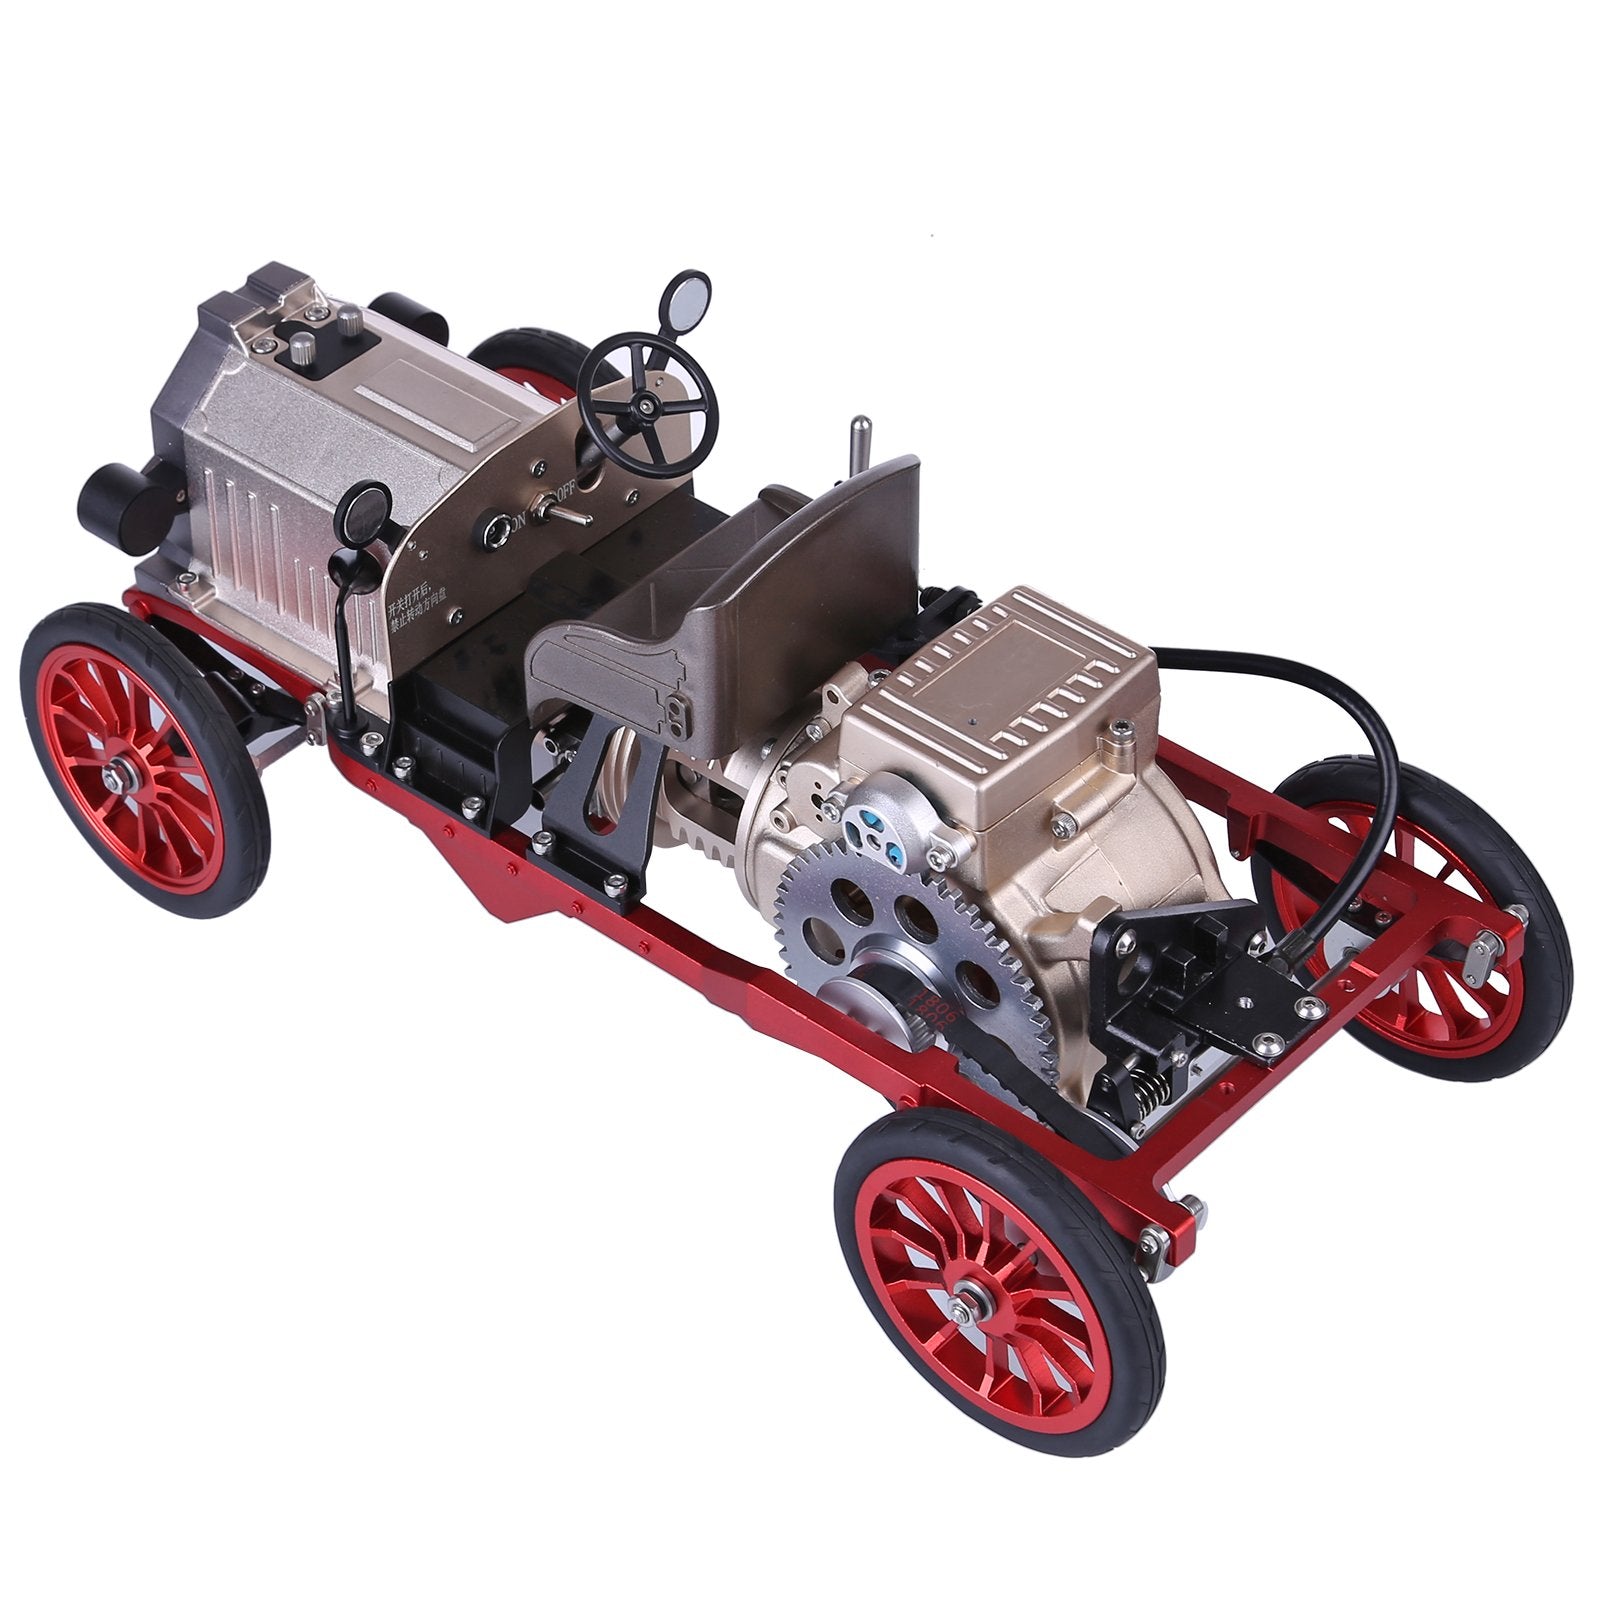 Teching Assembly Metal Mechanical Electric Vintage Classic Car Model Toy